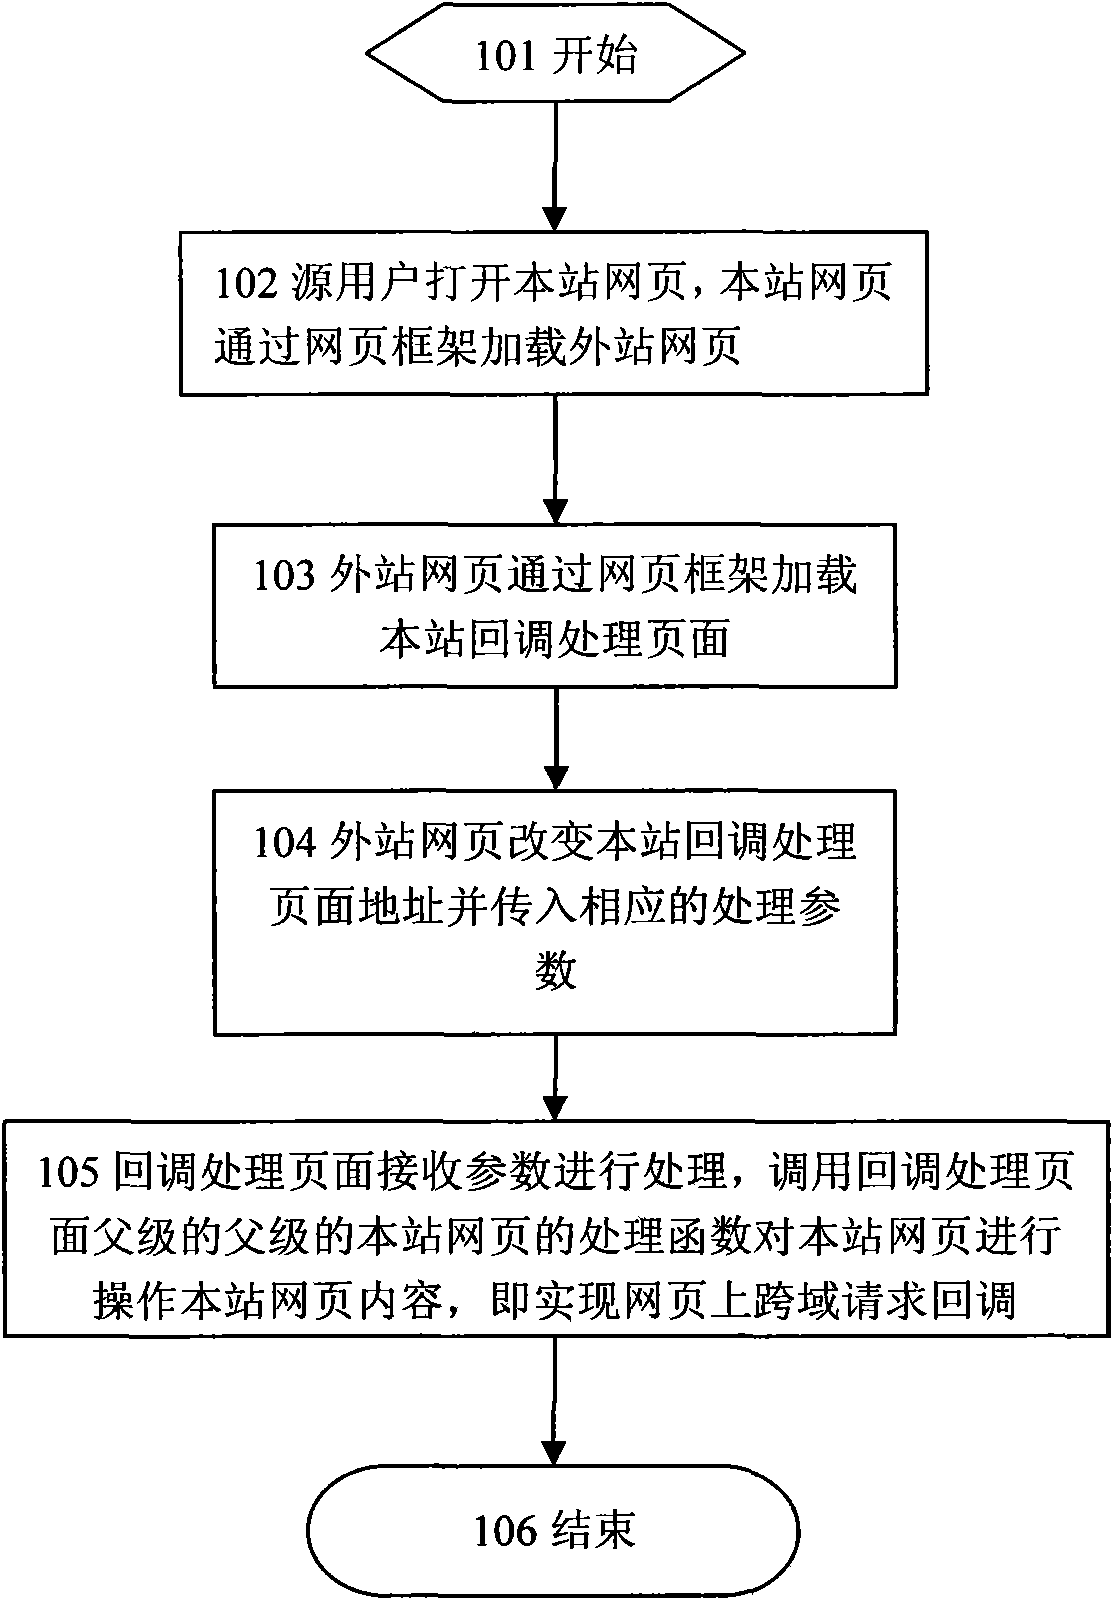 Method for implementing cross-domain request callback